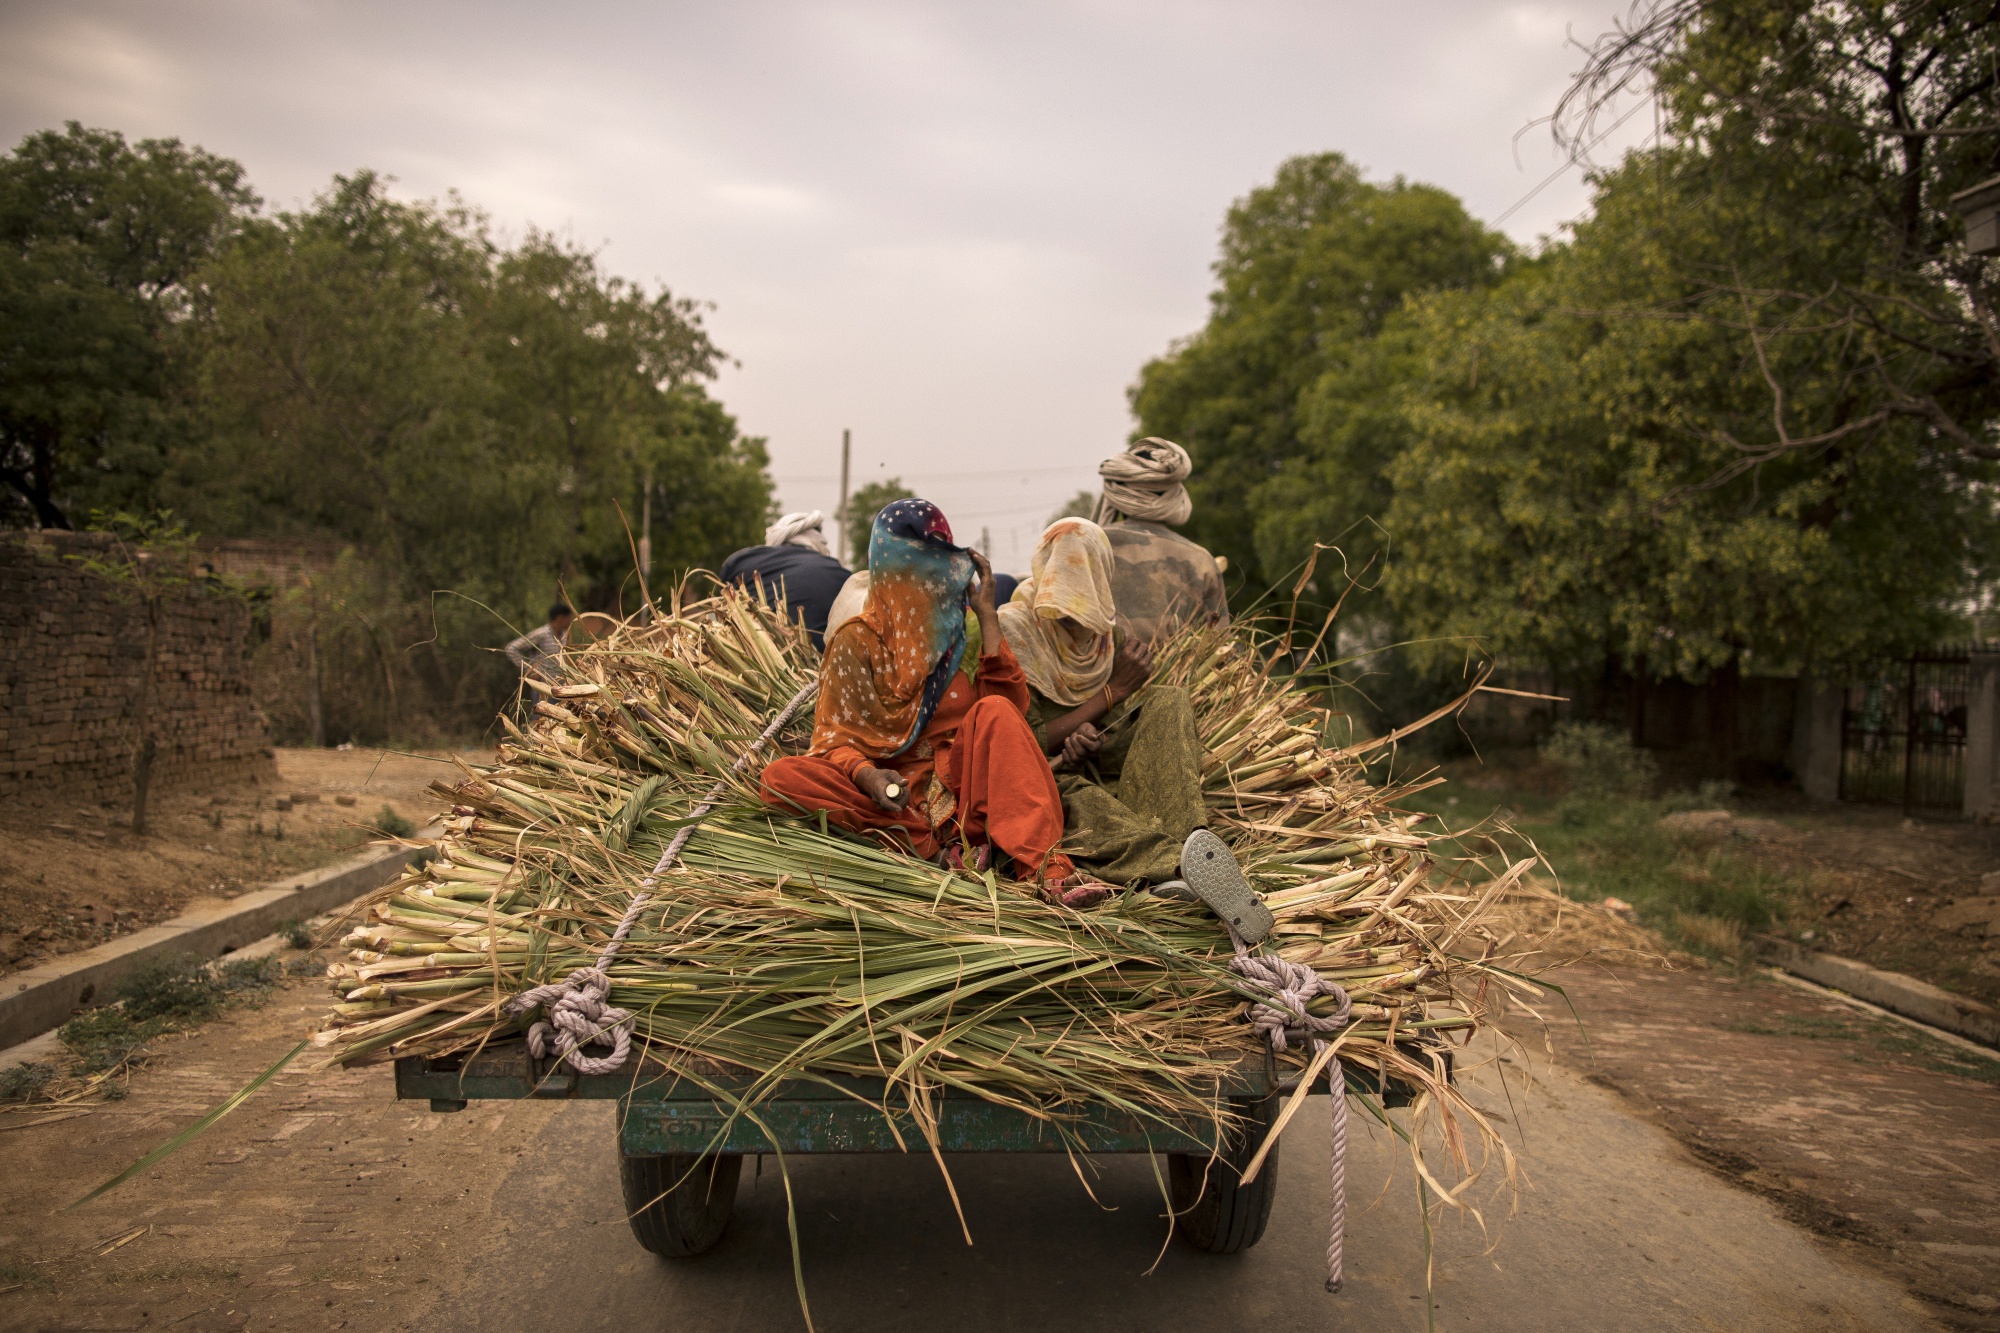 General view of the village as farmers on a cart use a cloth to cover their face in the village Bassi, in Baghpath, Uttar Pradesh, India